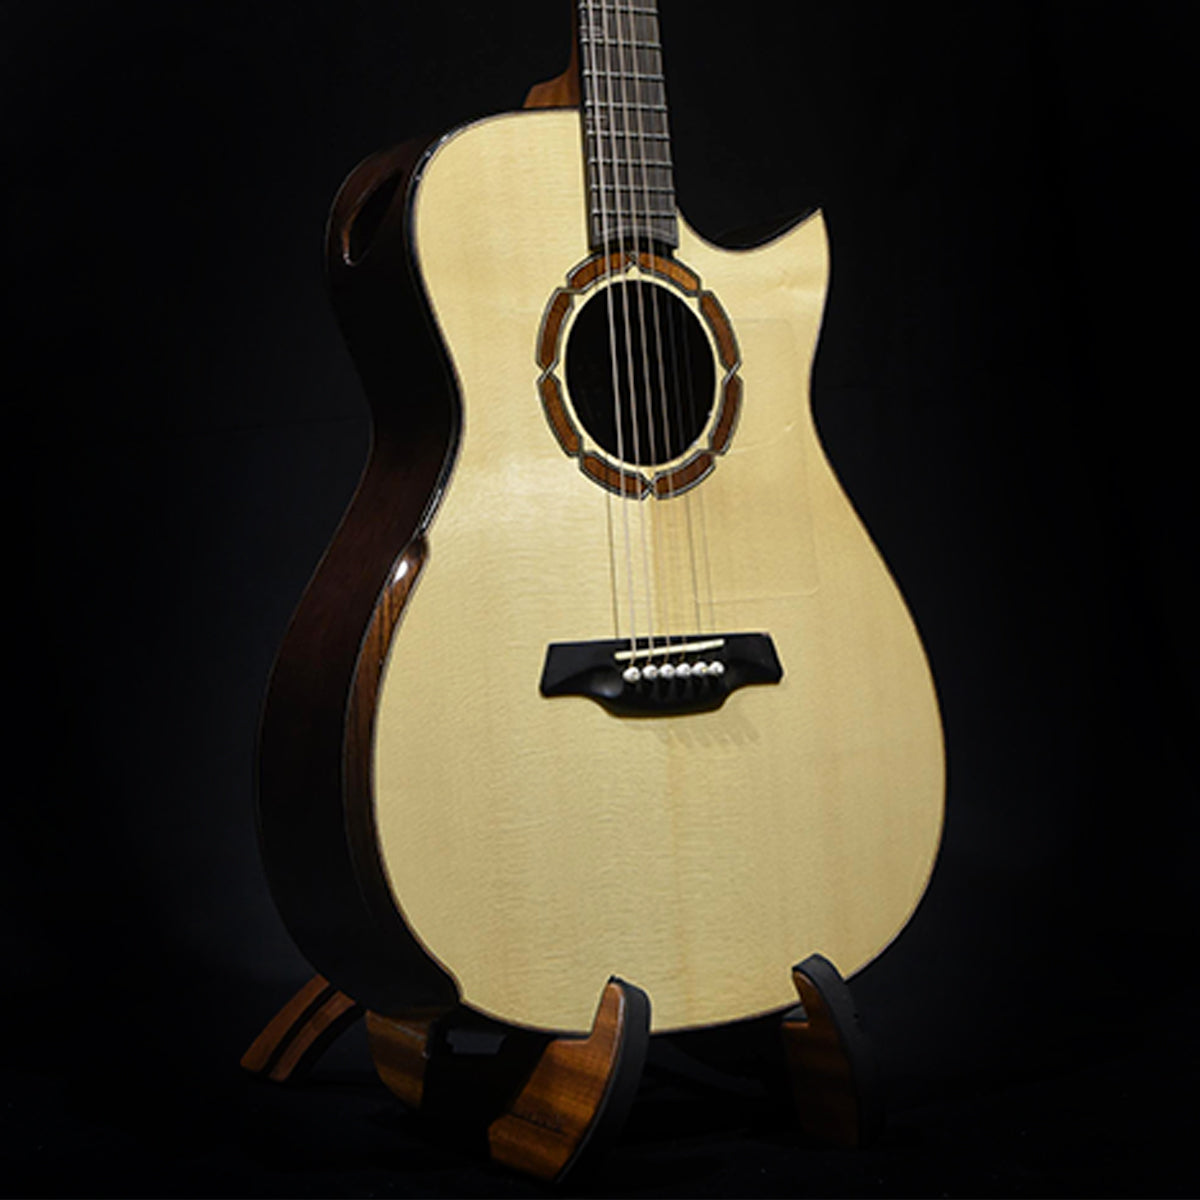 Blue Label OM Swiss Spruce with Madagascar Rosewood | #22